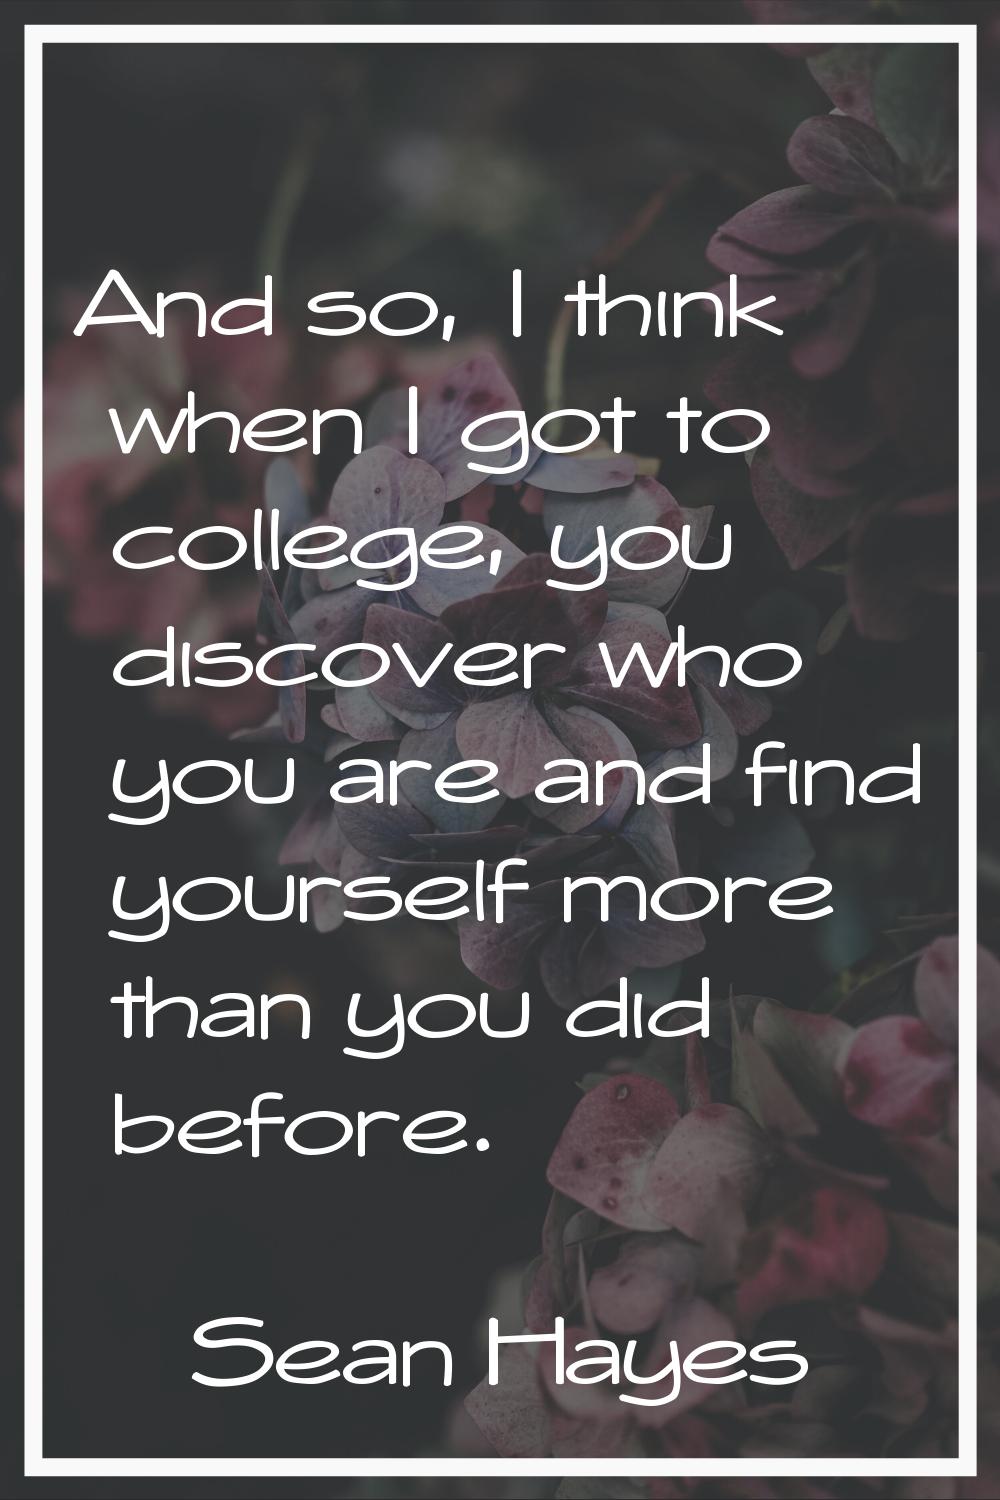 And so, I think when I got to college, you discover who you are and find yourself more than you did